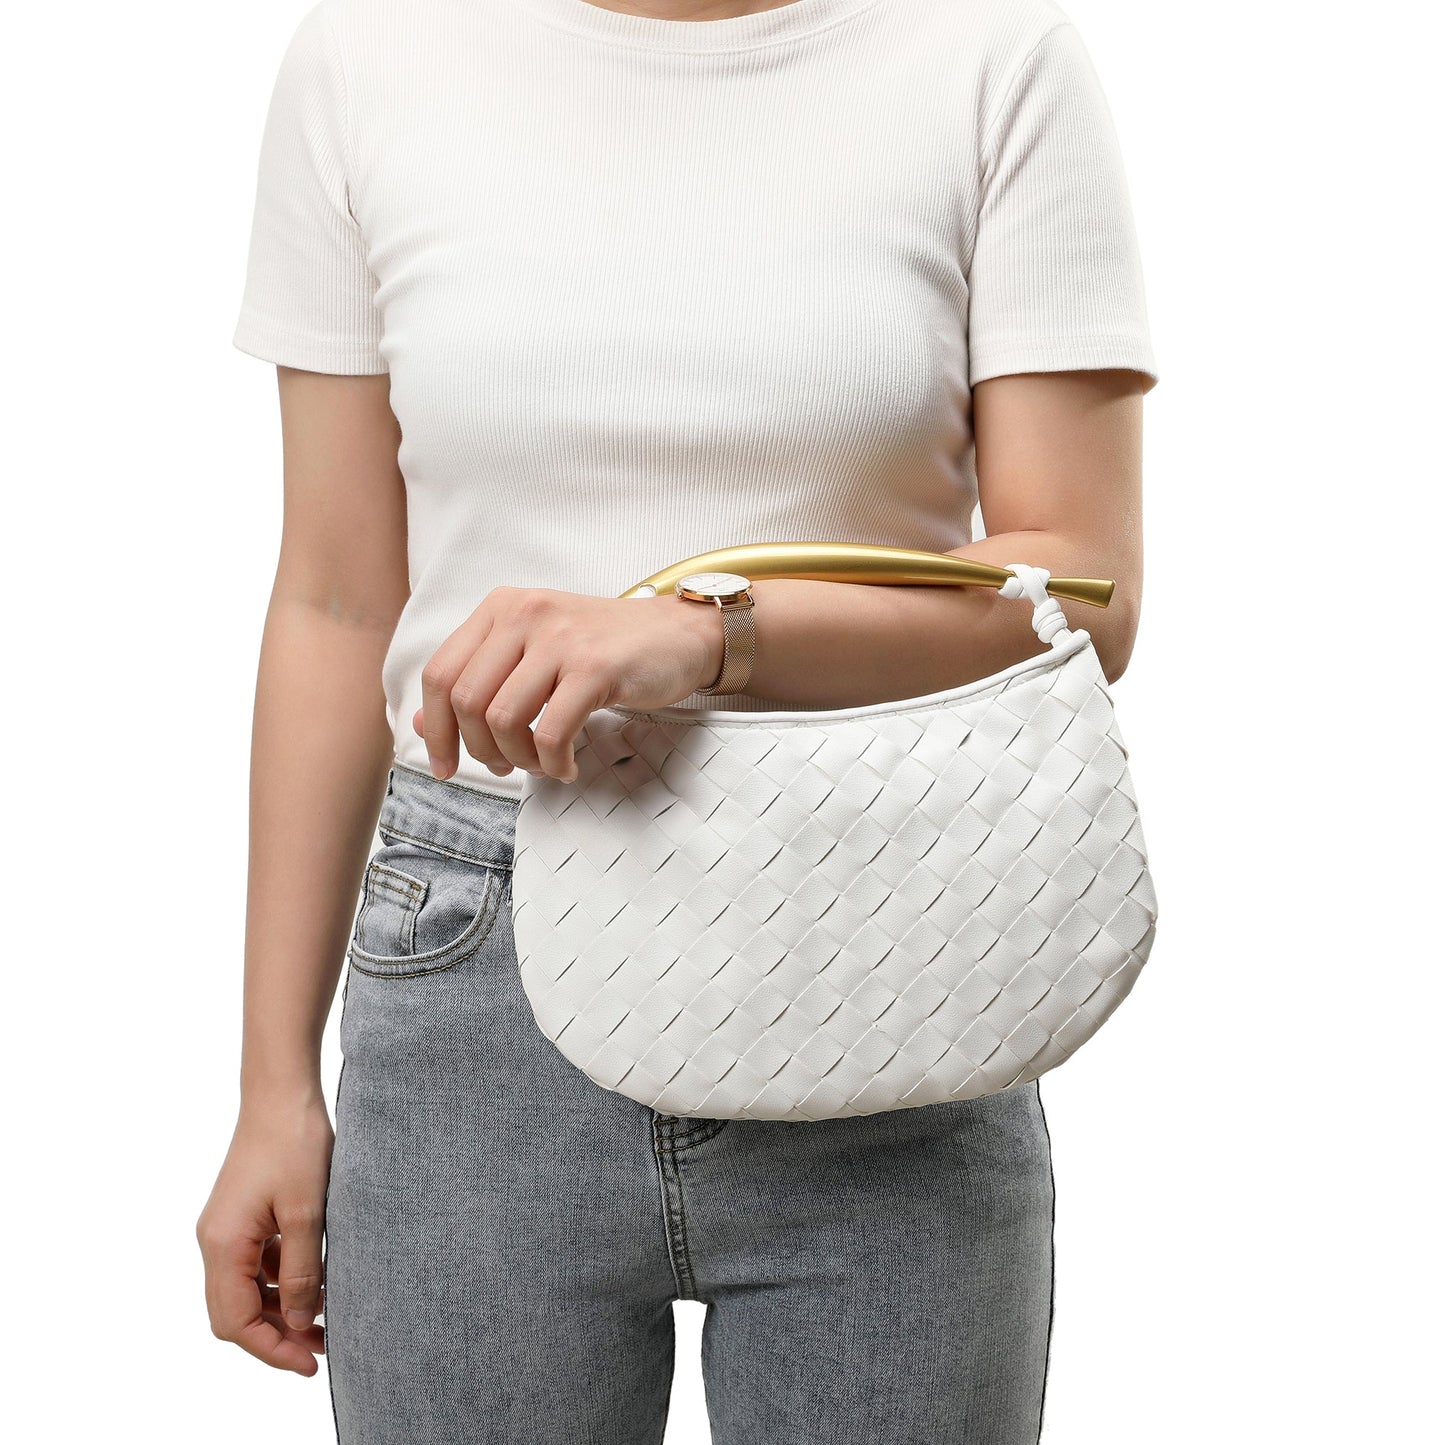 Woven Leather Top-Handle Bag/Clutch